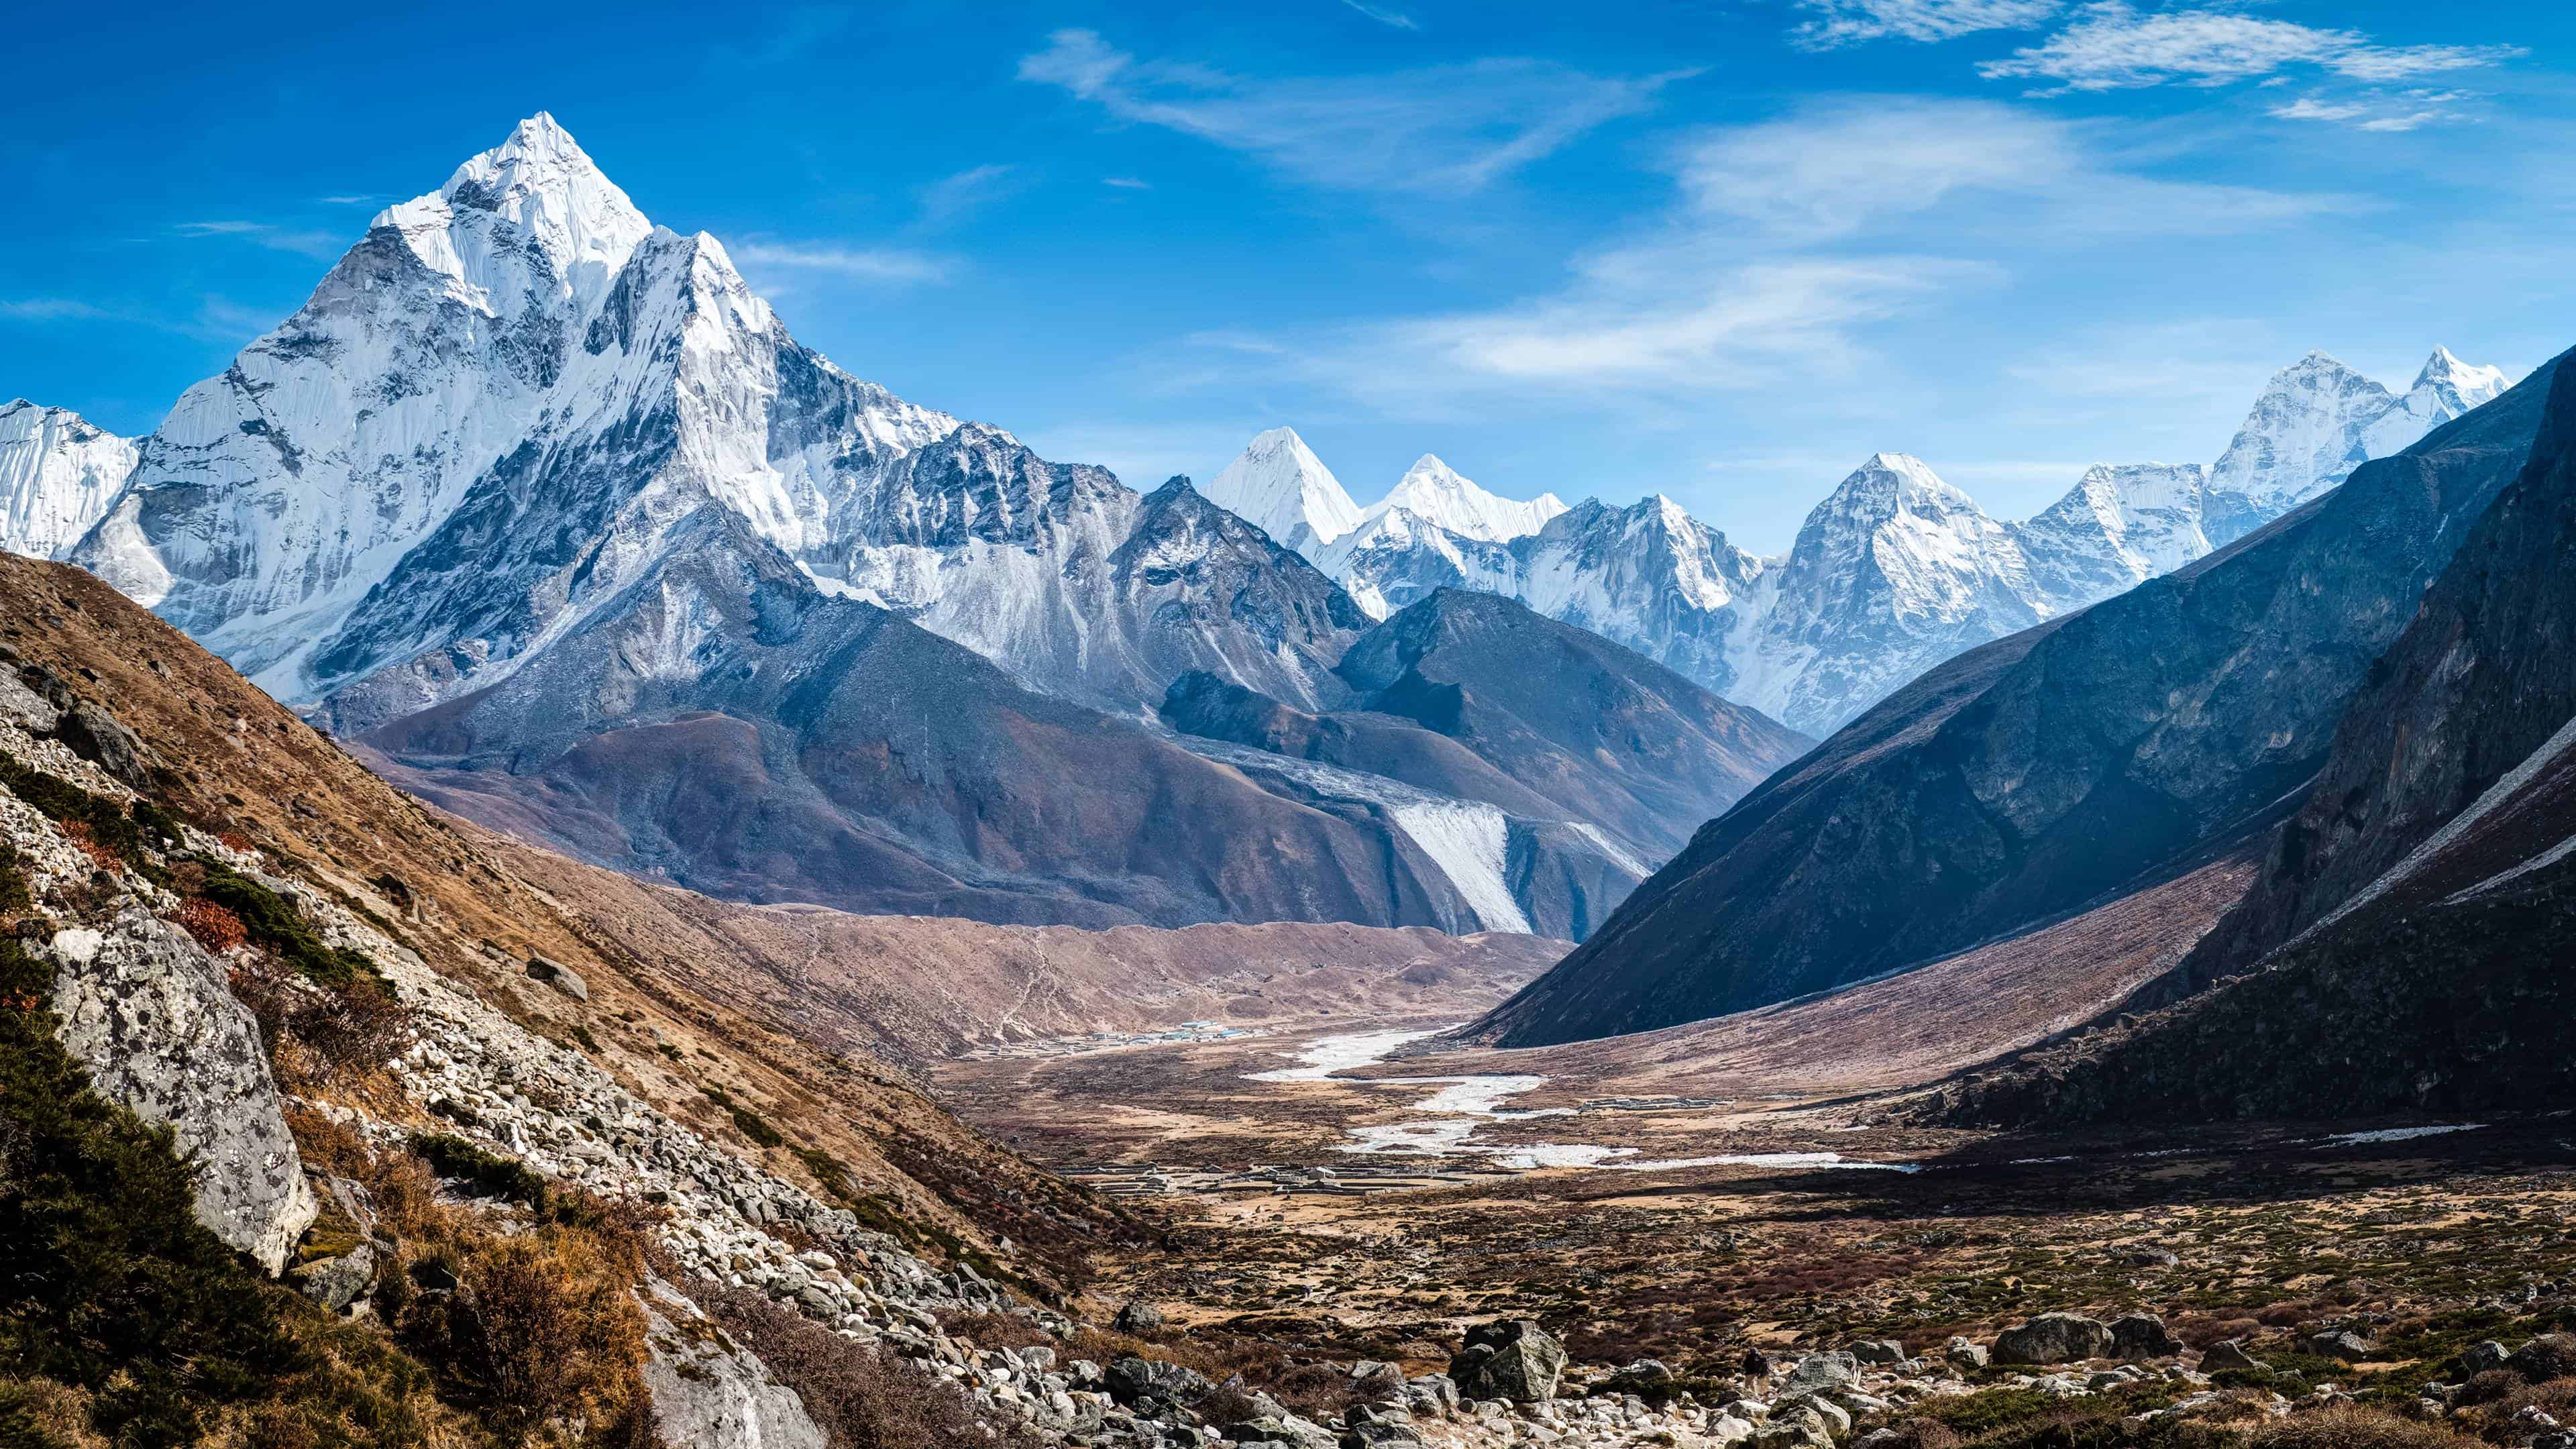 4535470 landscape, nature, mountains, clouds, Mount Everest - Rare Gallery  HD Wallpapers